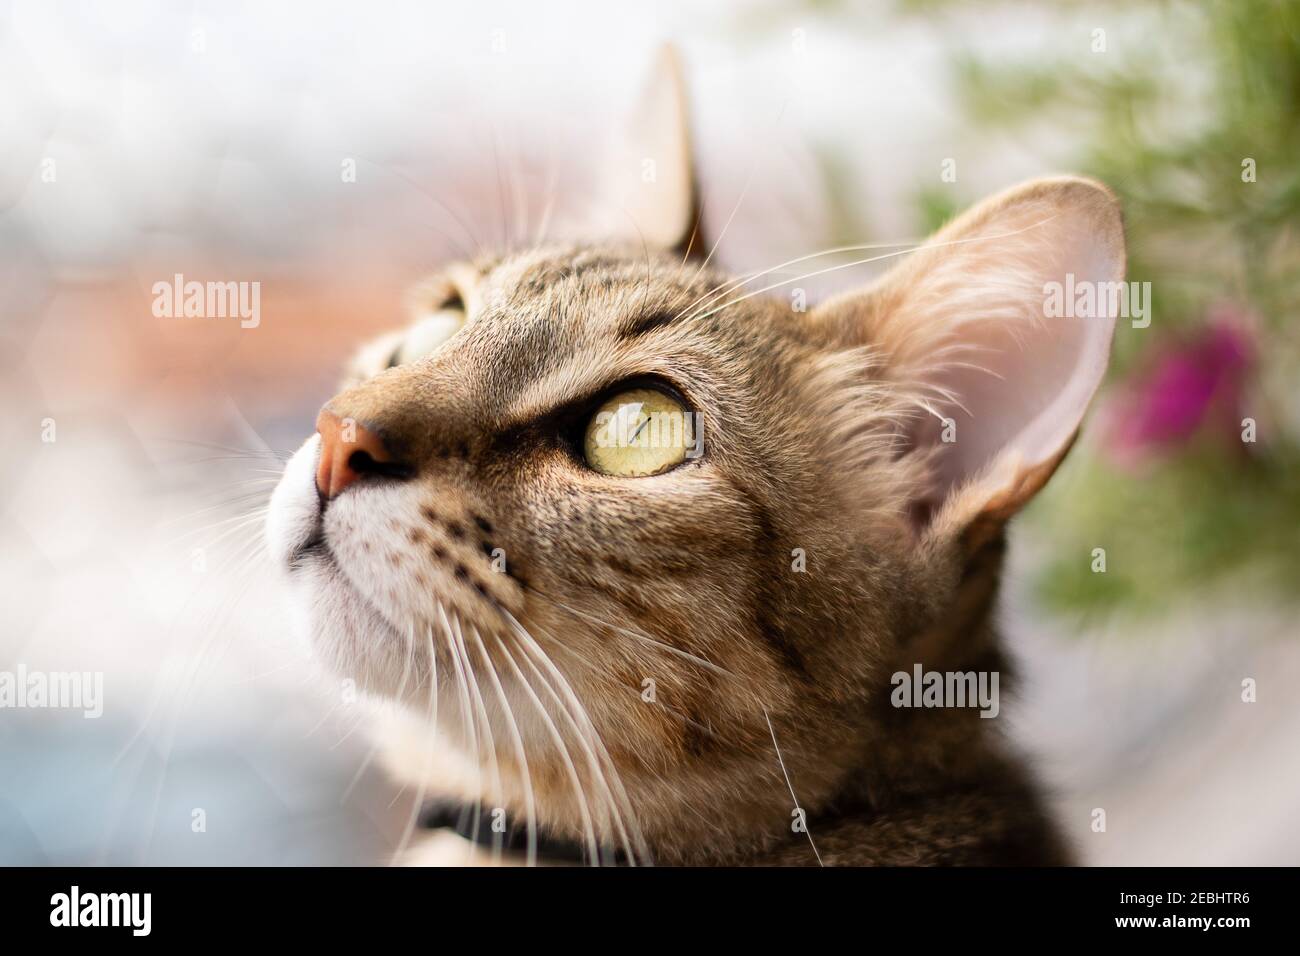 Beautiful tabby cat, brown orange and white, with green eyes, closeup face portrait Stock Photo